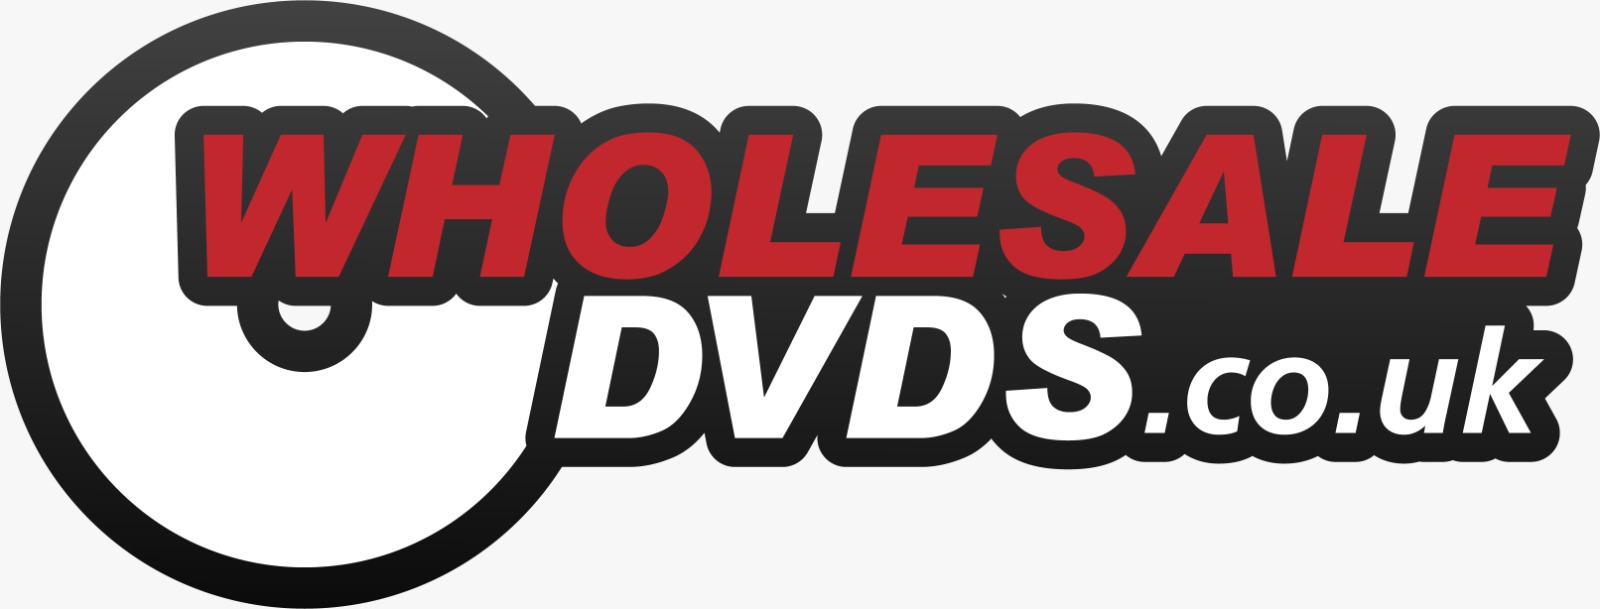 Whole Sale DVDs  Register FREE Today Buy Dvds Blu rays Video Games  Music Cds Fetish Clothing Adult Dvds Adult Videos Used Knickers A4 Glossy Photos